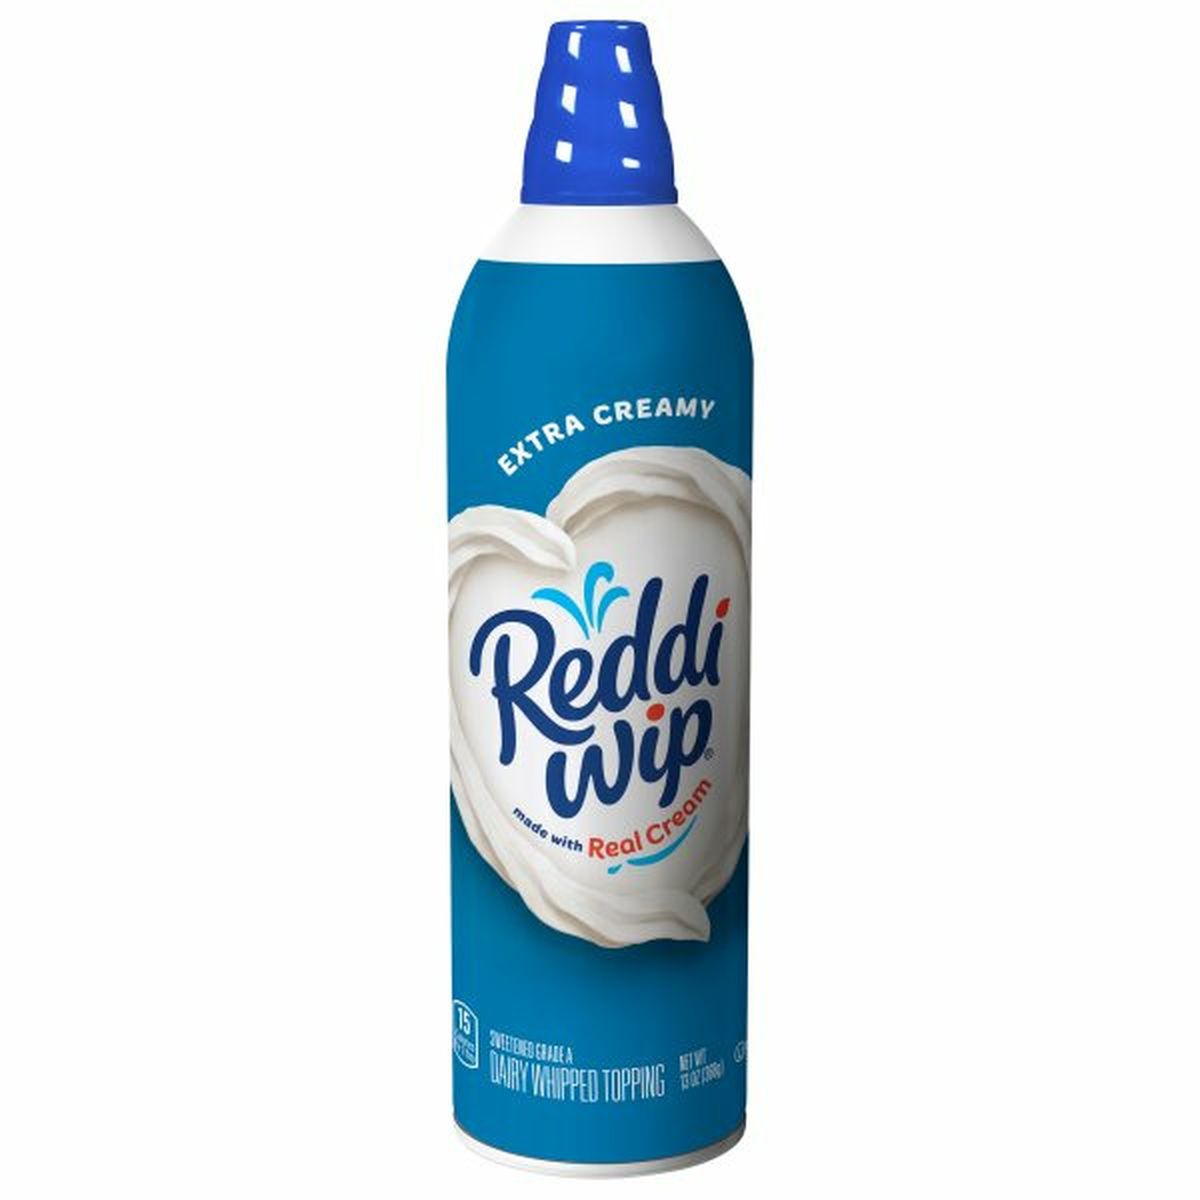 Calories in Reddi-wip Dairy Whipped Topping, Extra Creamy